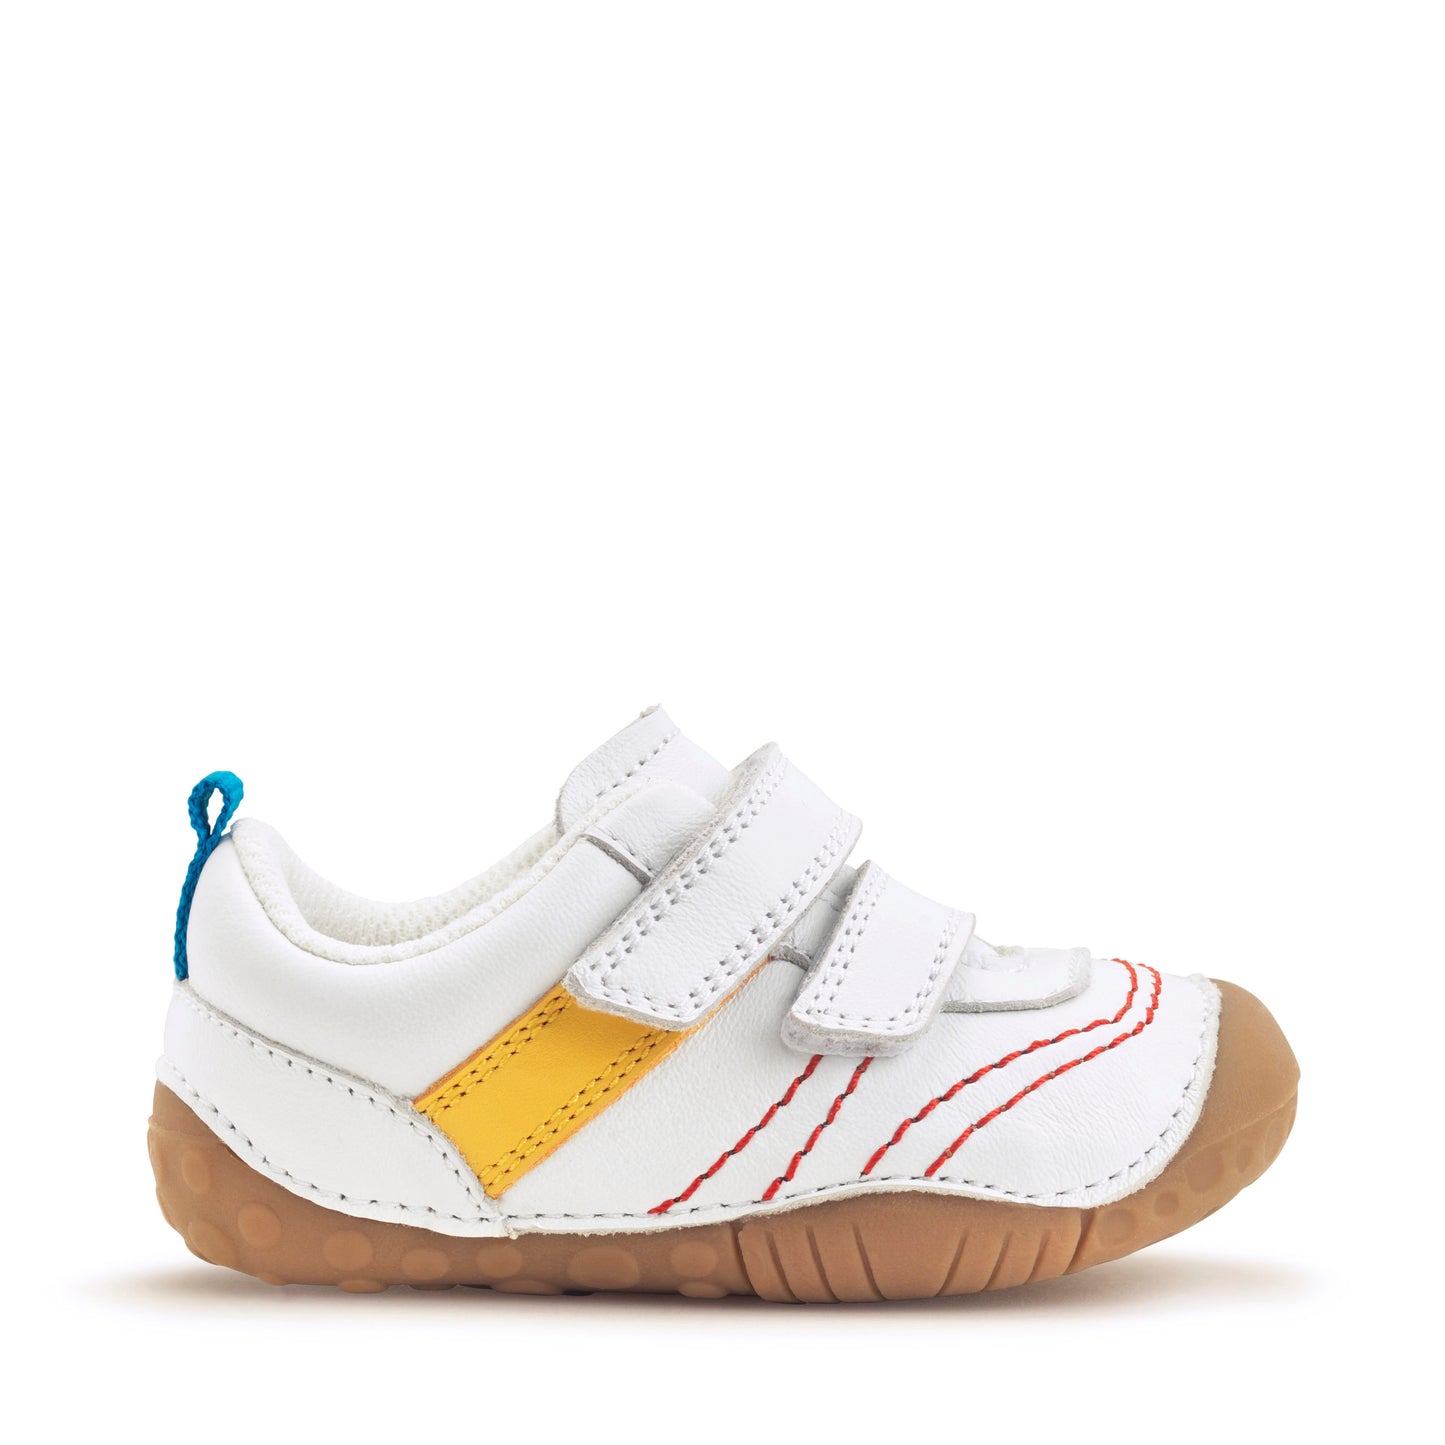 A boys pre-walker by Start-Rite, style Little Smile, white leather with yellow strip and red stitch detail, double velcro fastening. Right side view.